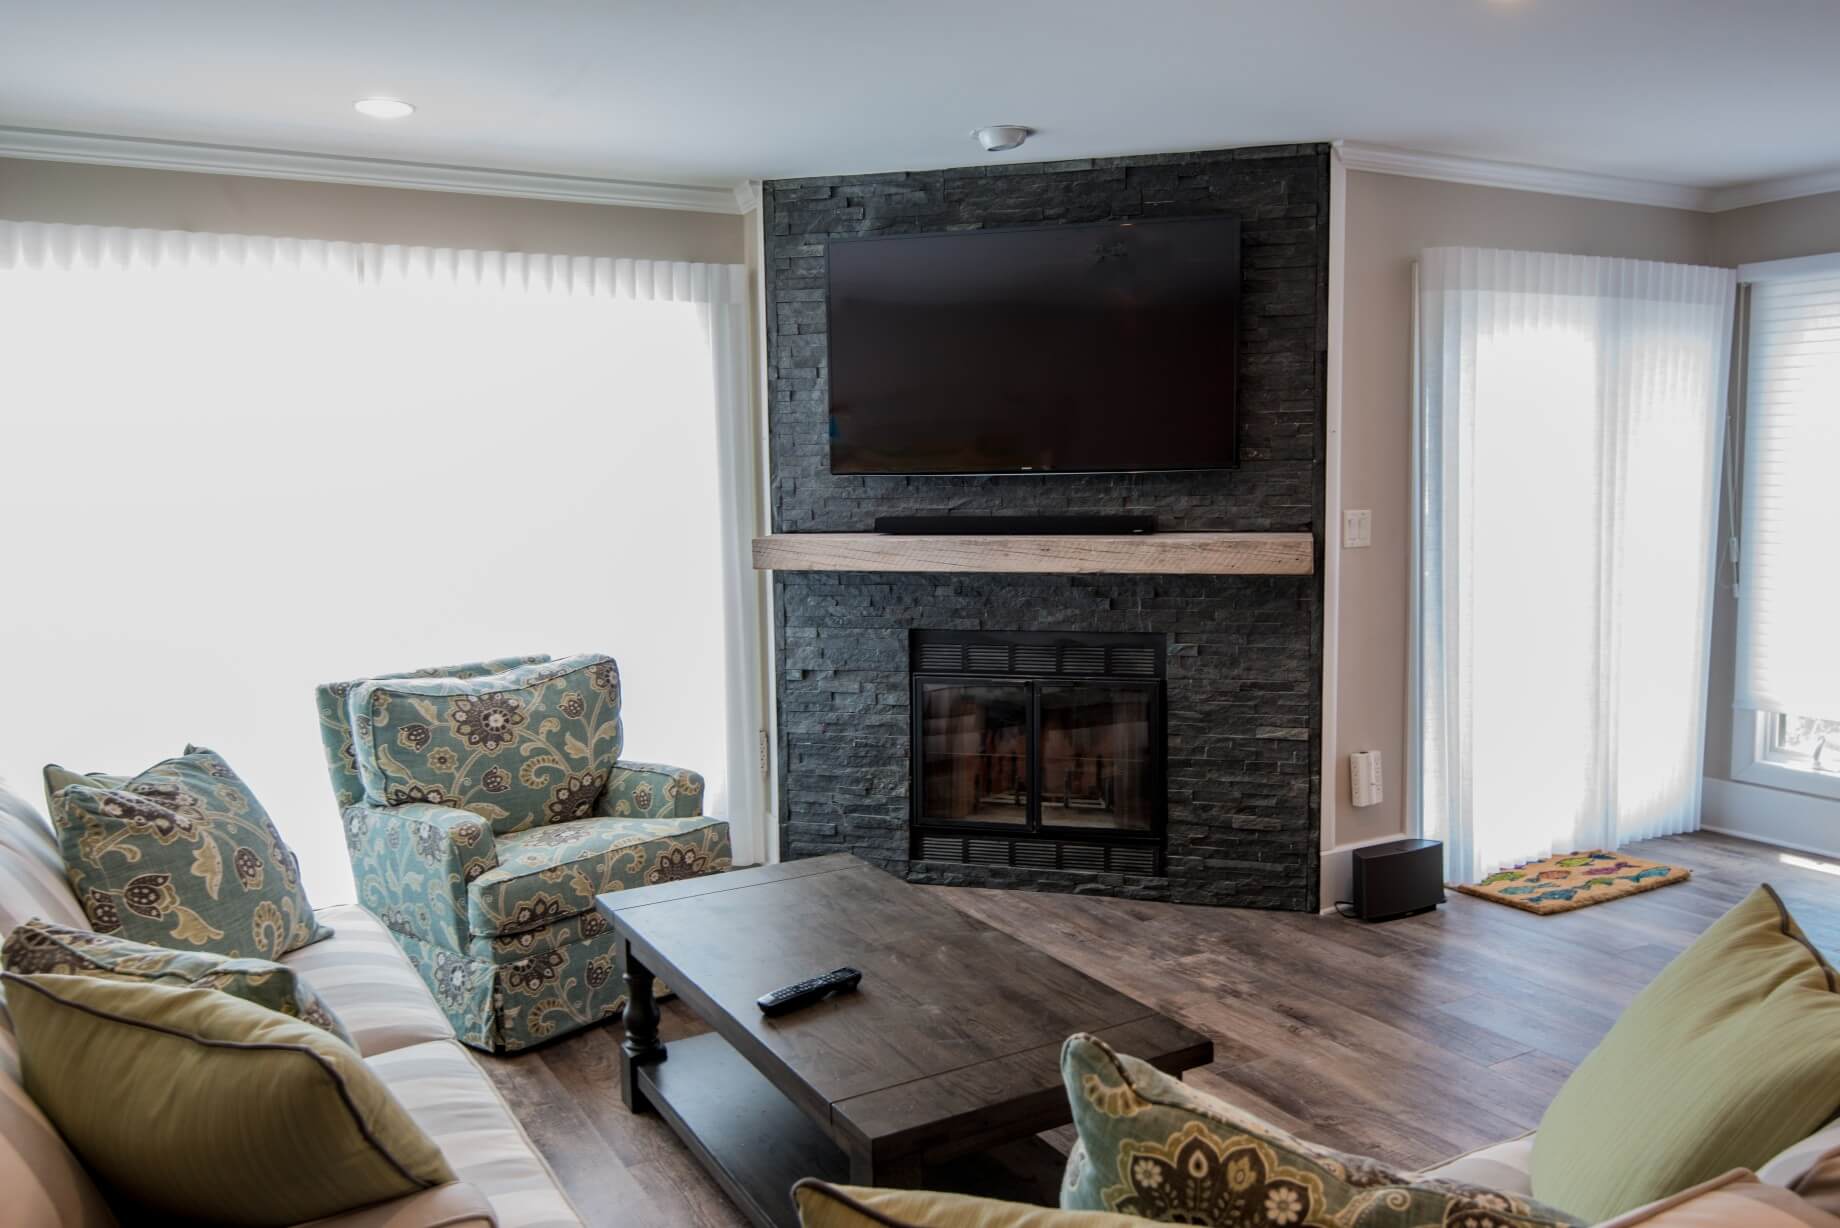 Kings Grant Renovation Vol.2 with Wall Mount TV Above Dark Stone Fireplace, Hardwood Flooring and Dark Wood Coffee Table